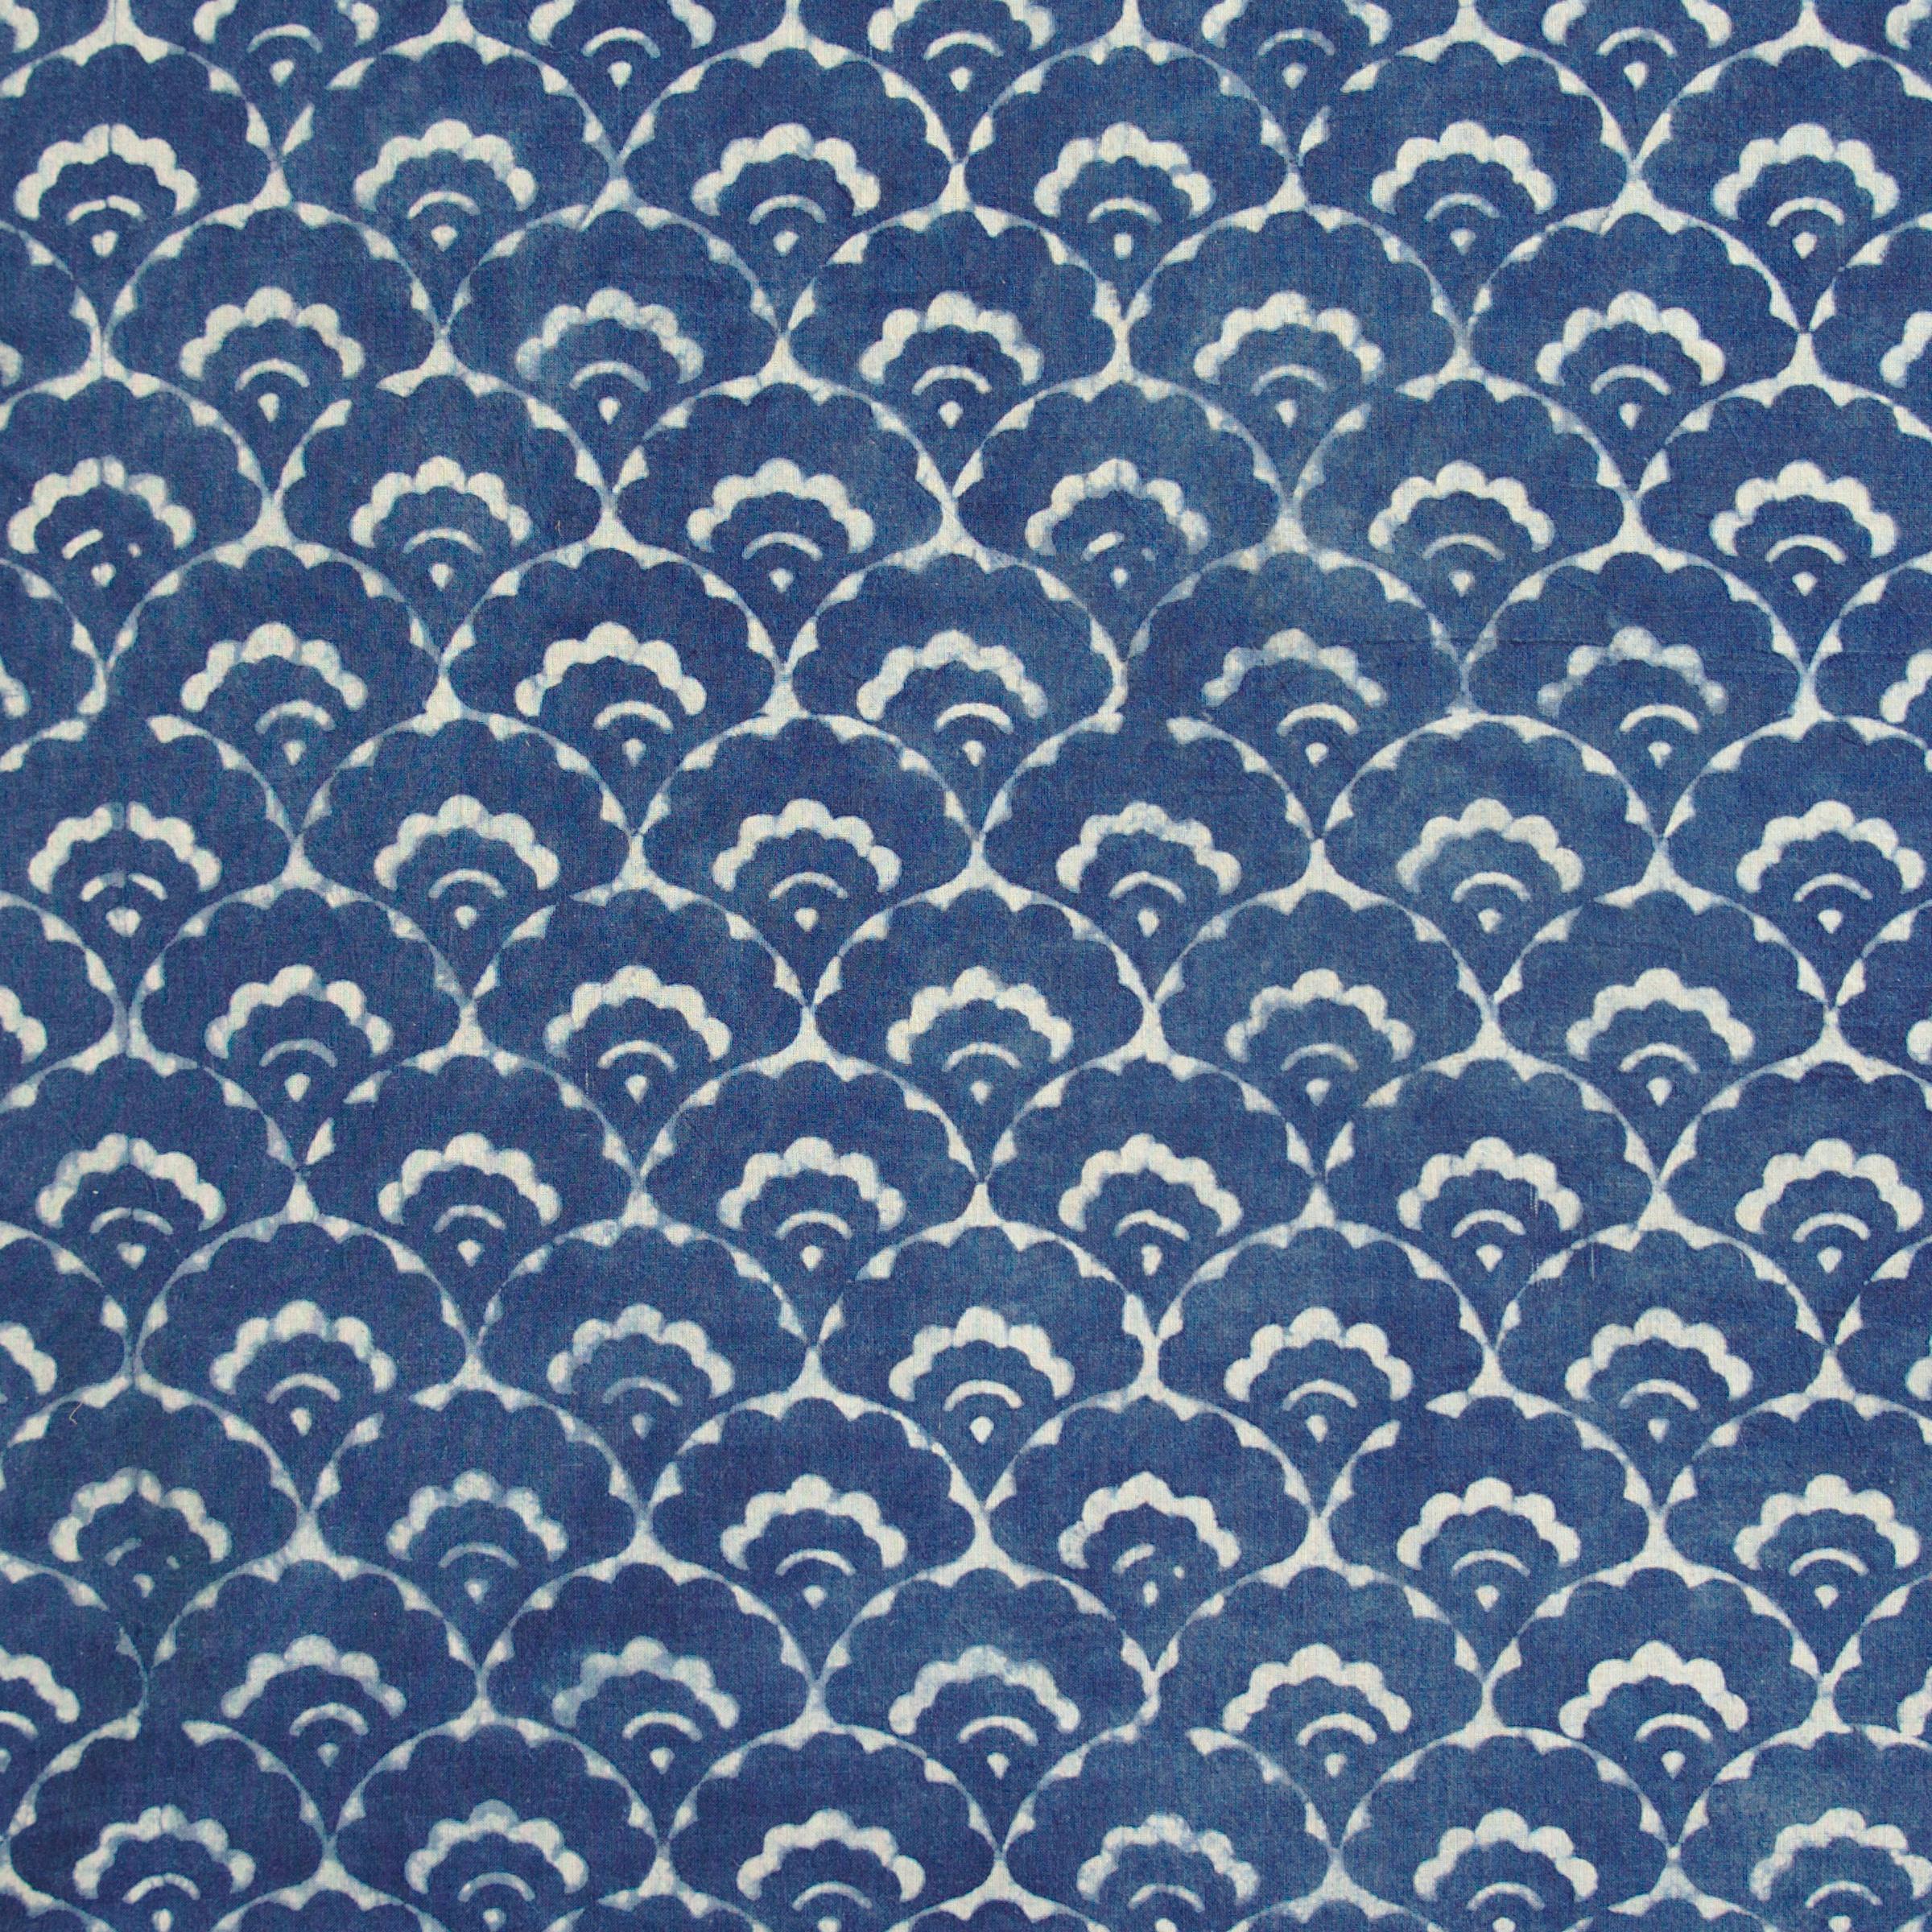 Indian Block-Printed Cotton - Clouds Print - Printed With Resist and Dyed in Indigo - Flat